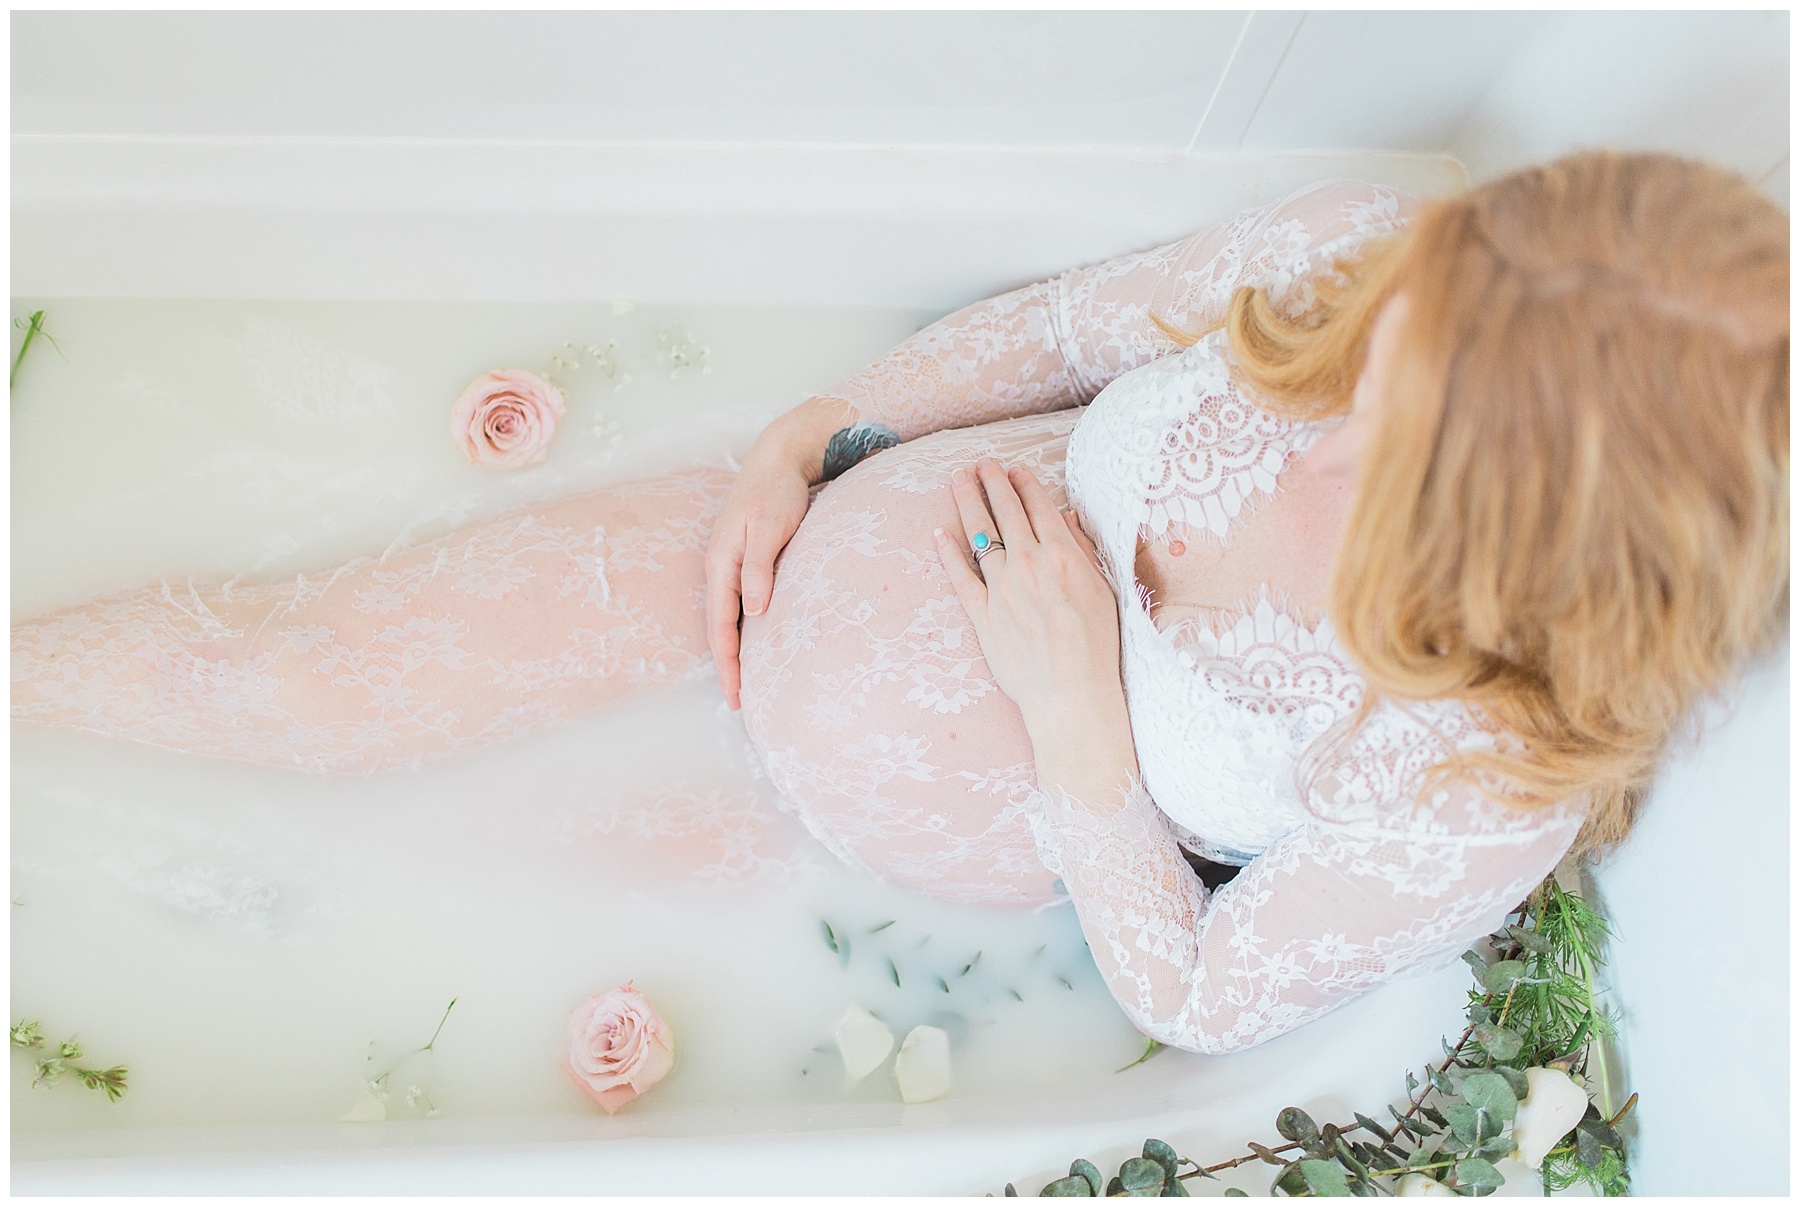 redheaded pregnant woman takes a milk bath with flowers in her bangor, maine, home in a white, see-through dress